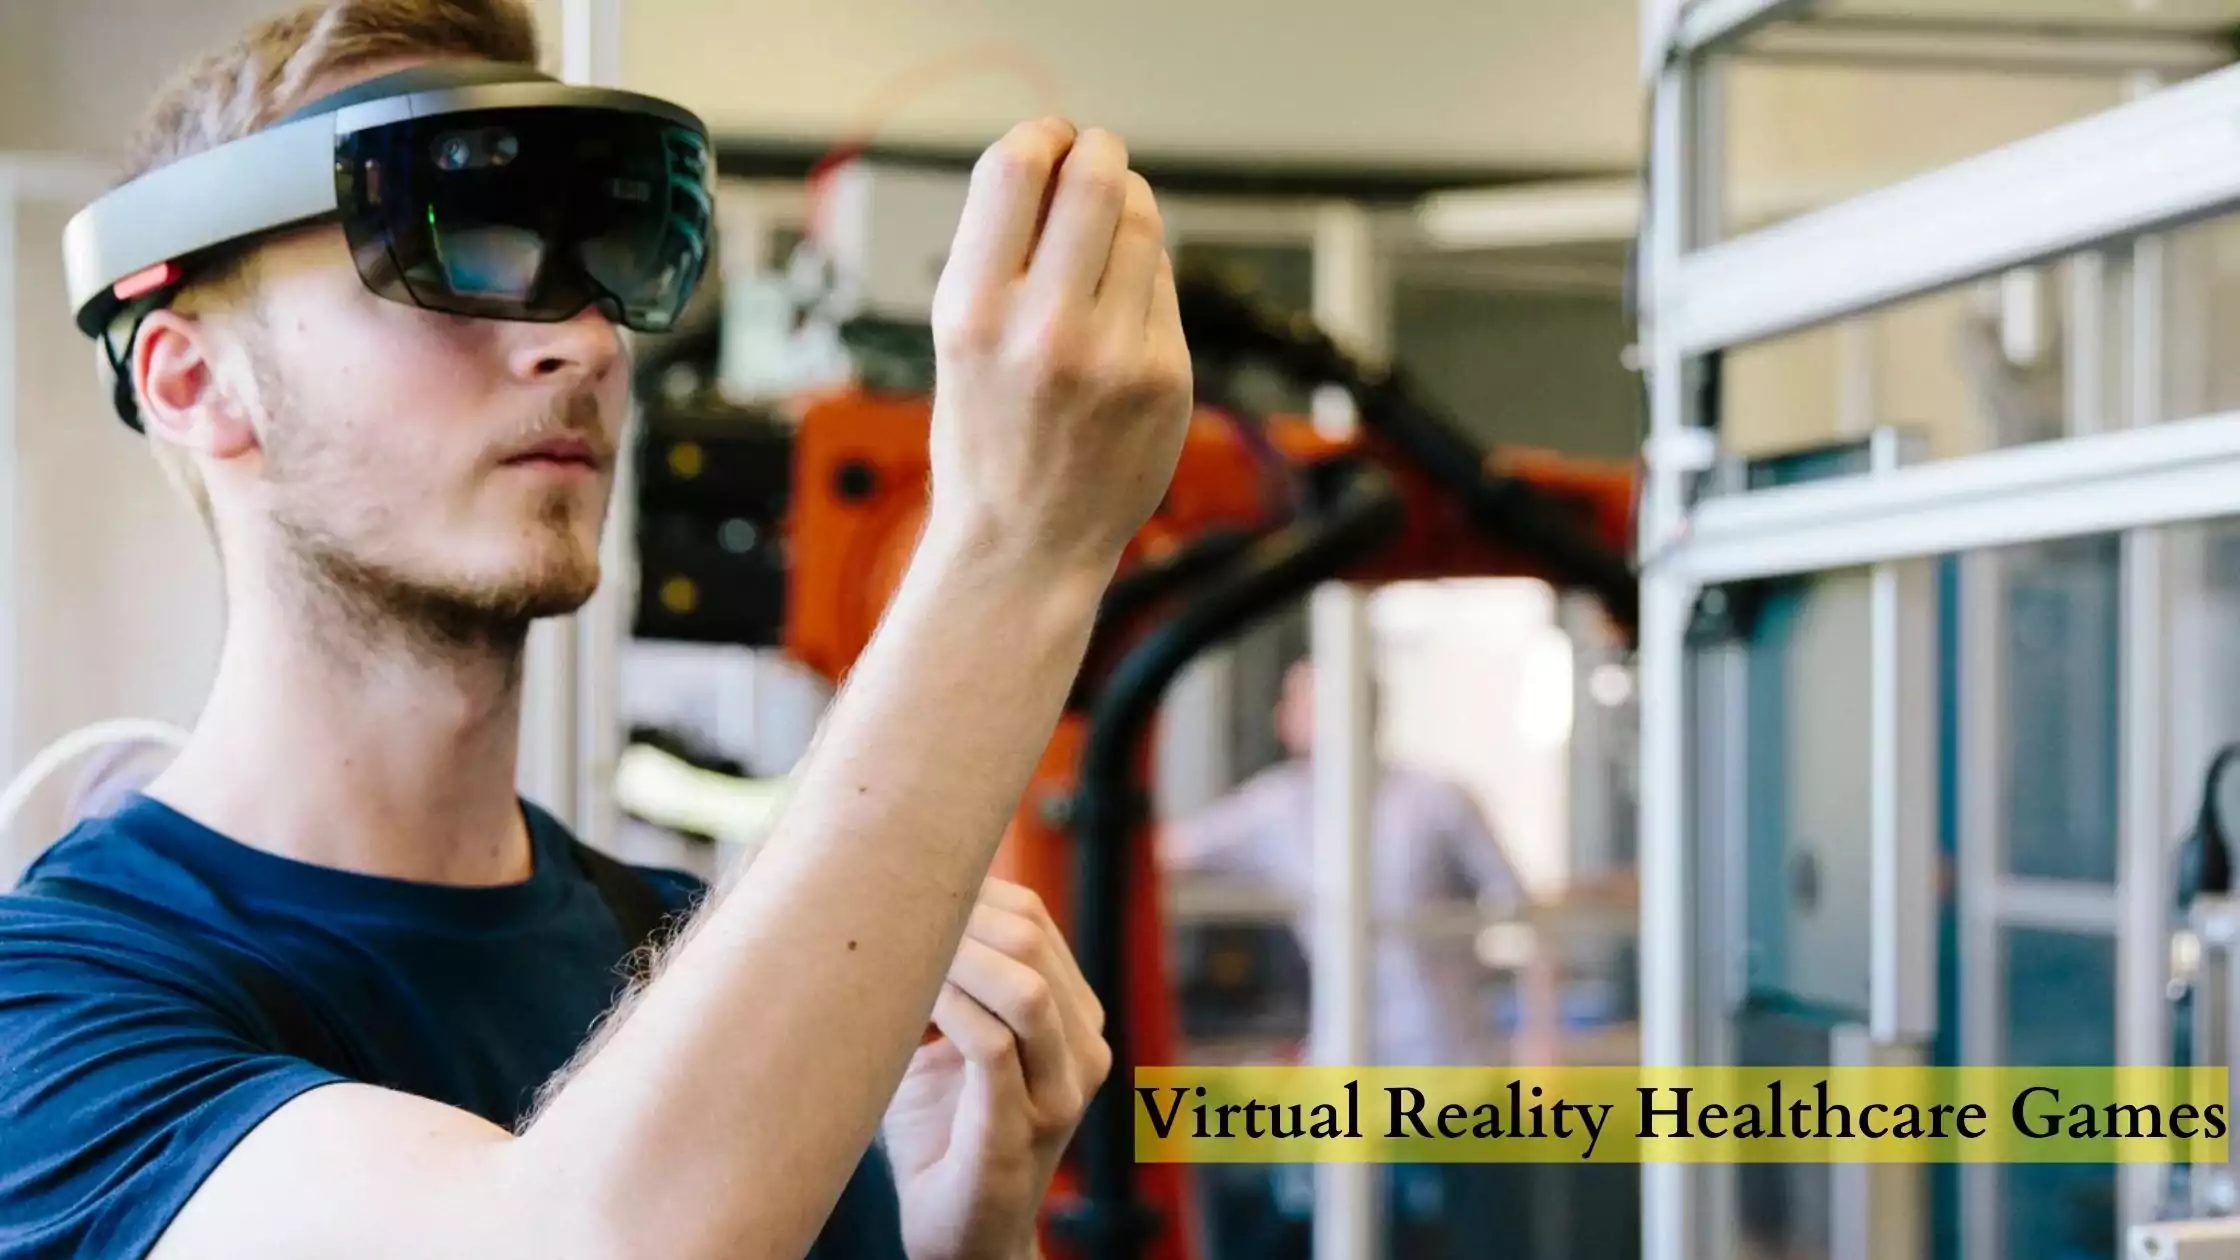 Are Virtual Reality Healthcare Games the Next Money-Makers